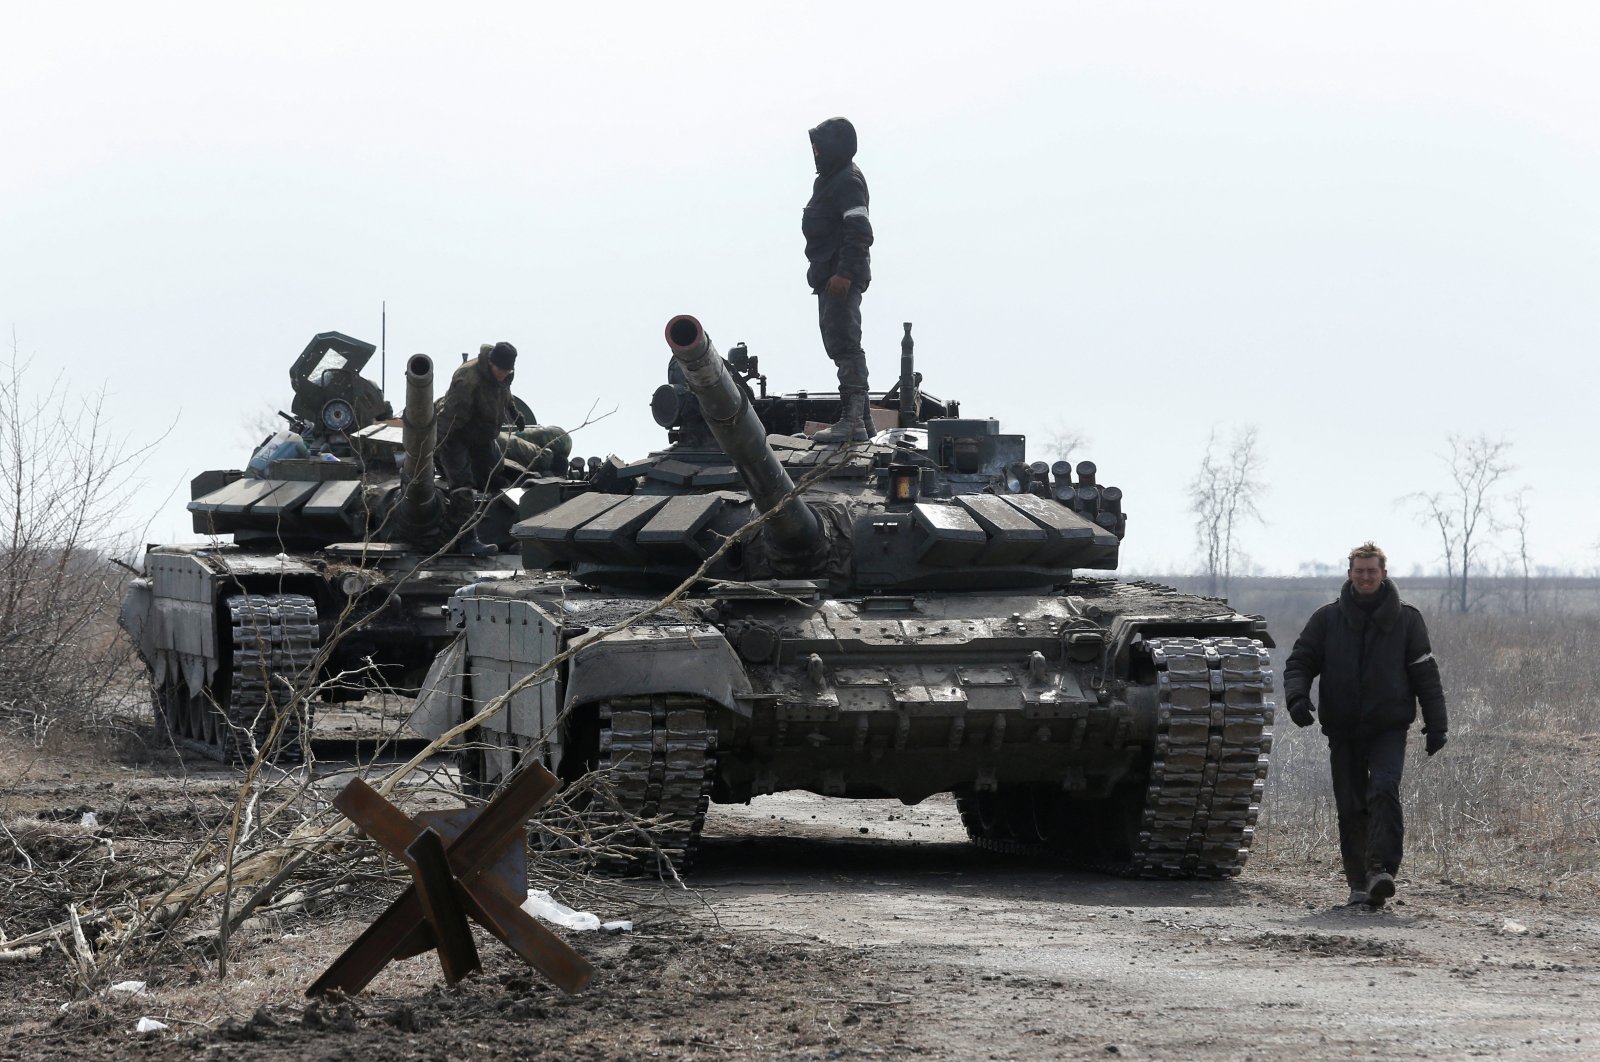 A view of pro-Russian troops and tanks during the Ukraine-Russia conflict on the outskirts of the besieged southern port city of Mariupol, Ukraine, March 20, 2022. (Reuters Photo)